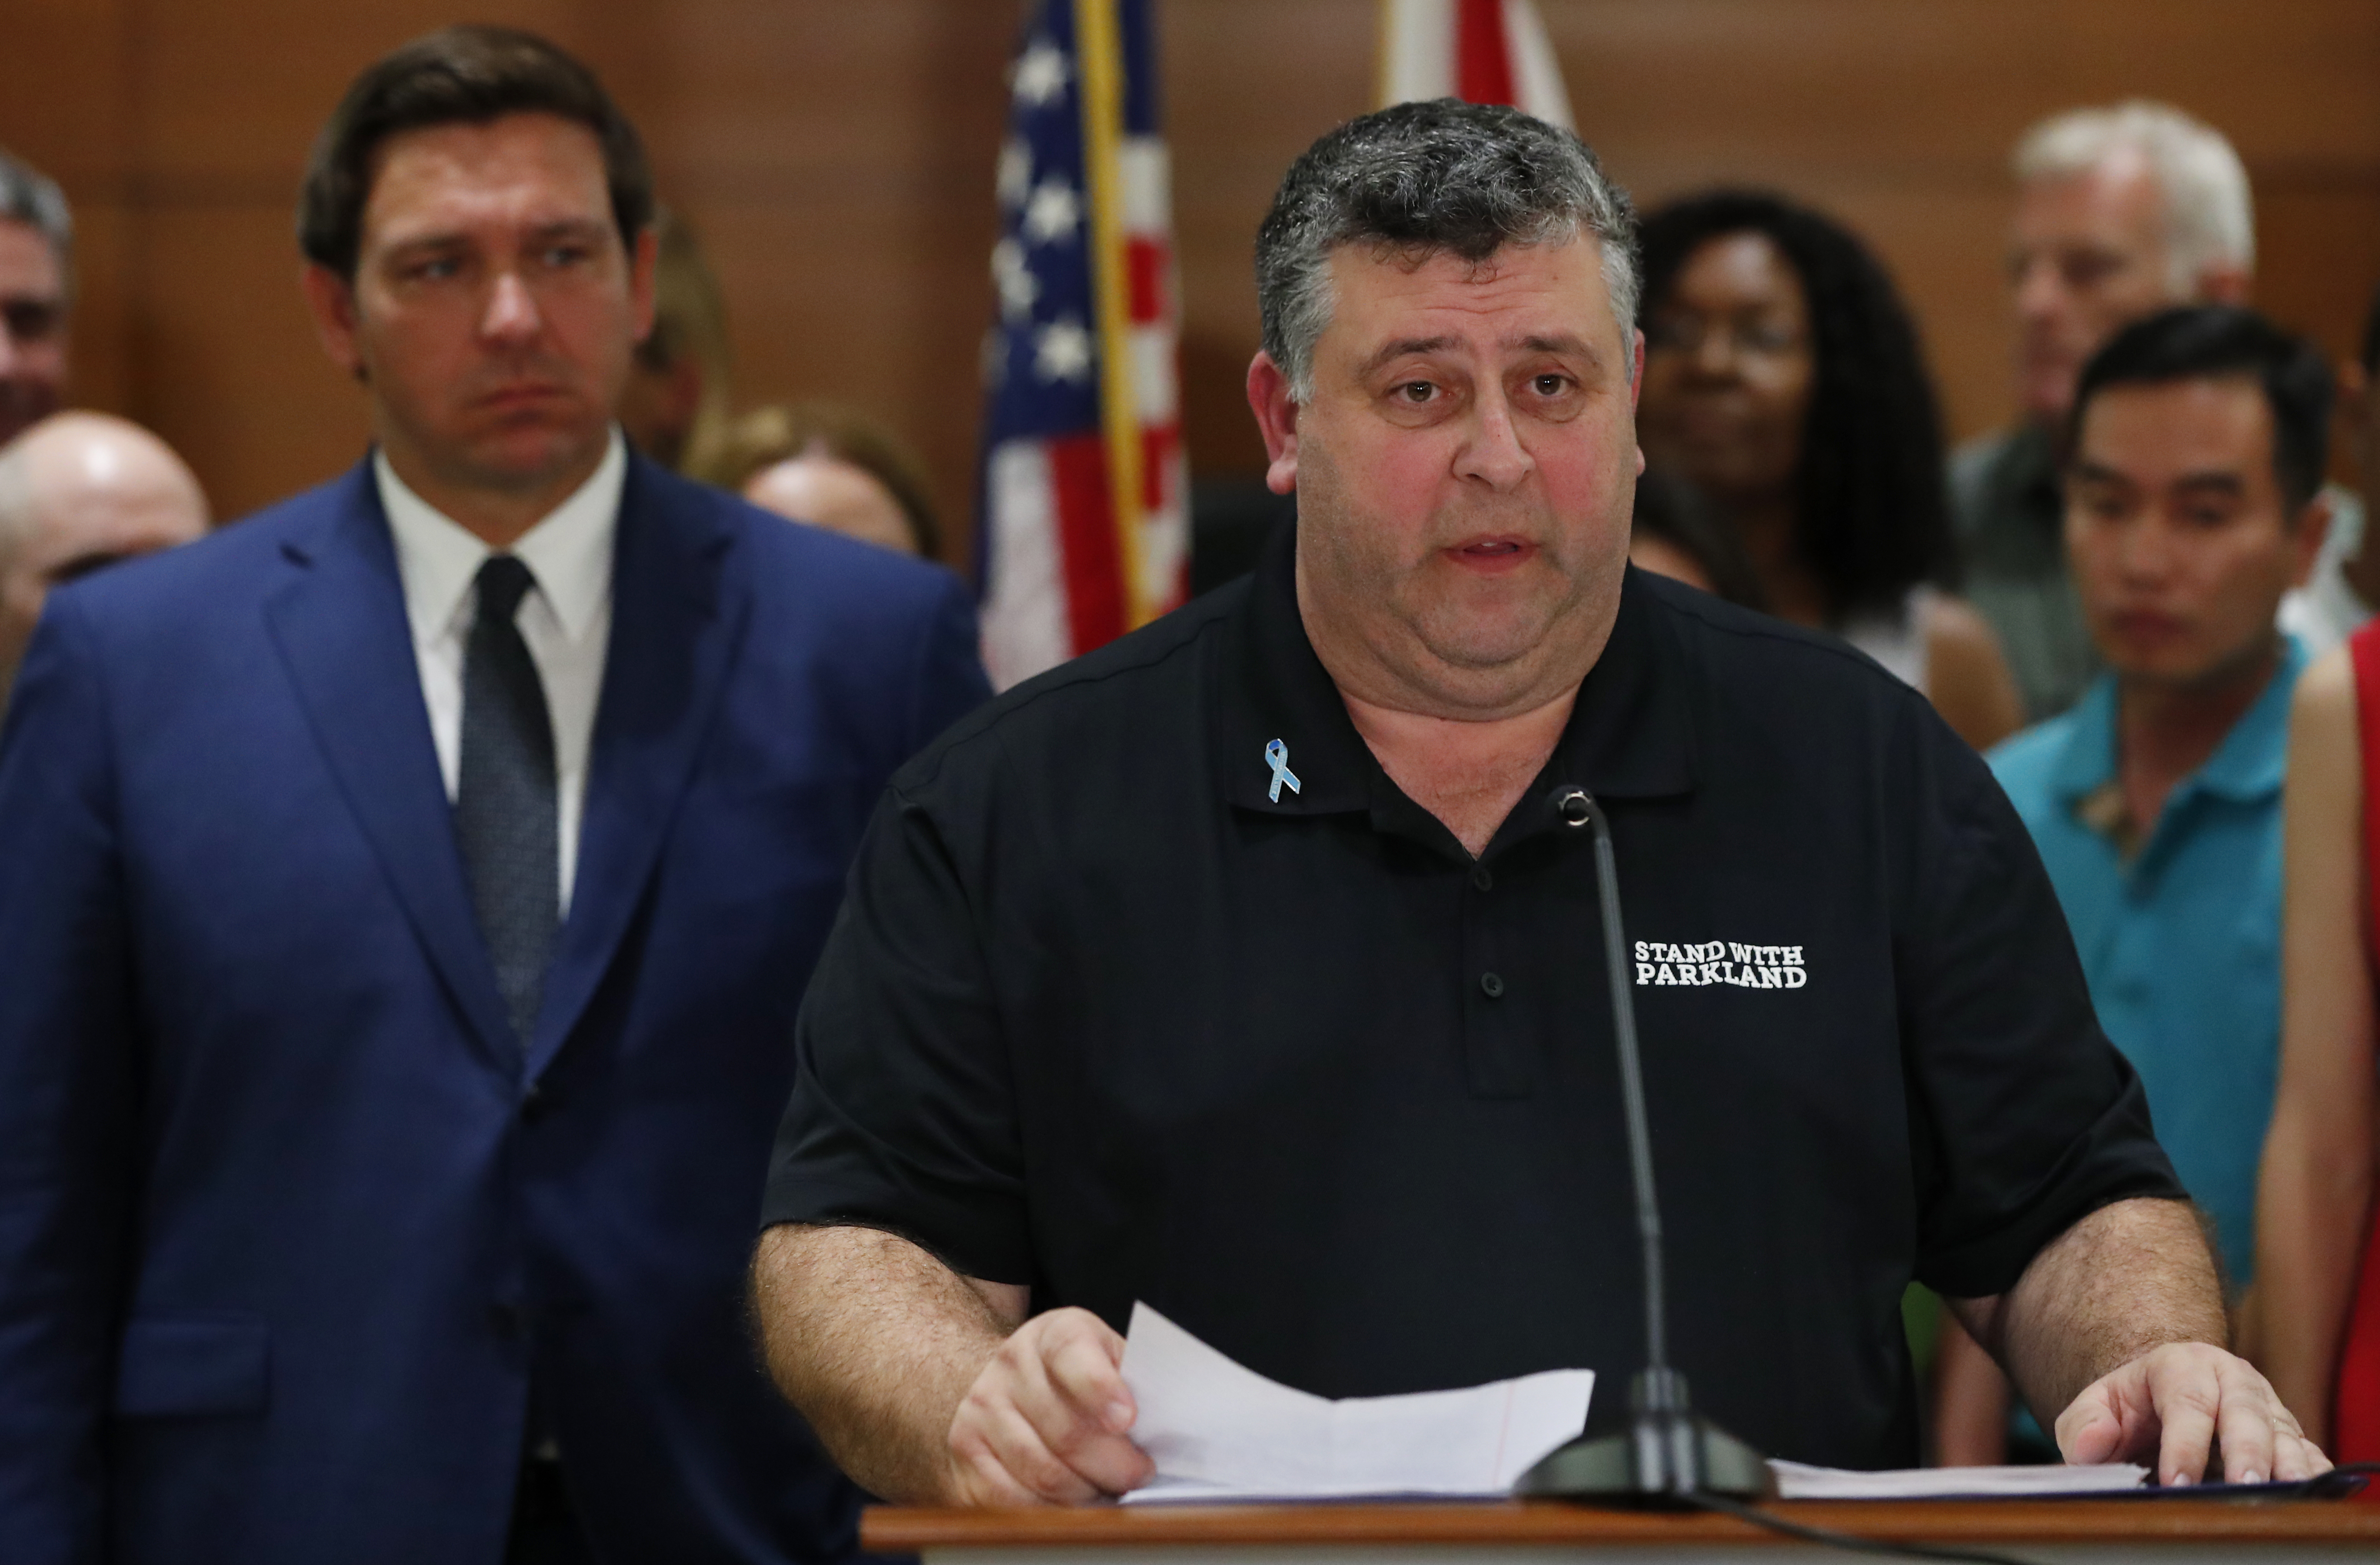 Tony Montalto, father of Gina Montalto, who was killed during the Parkland school shooting, speaks as Florida governor Ron DeSantis, left, looks on during a news conference. 